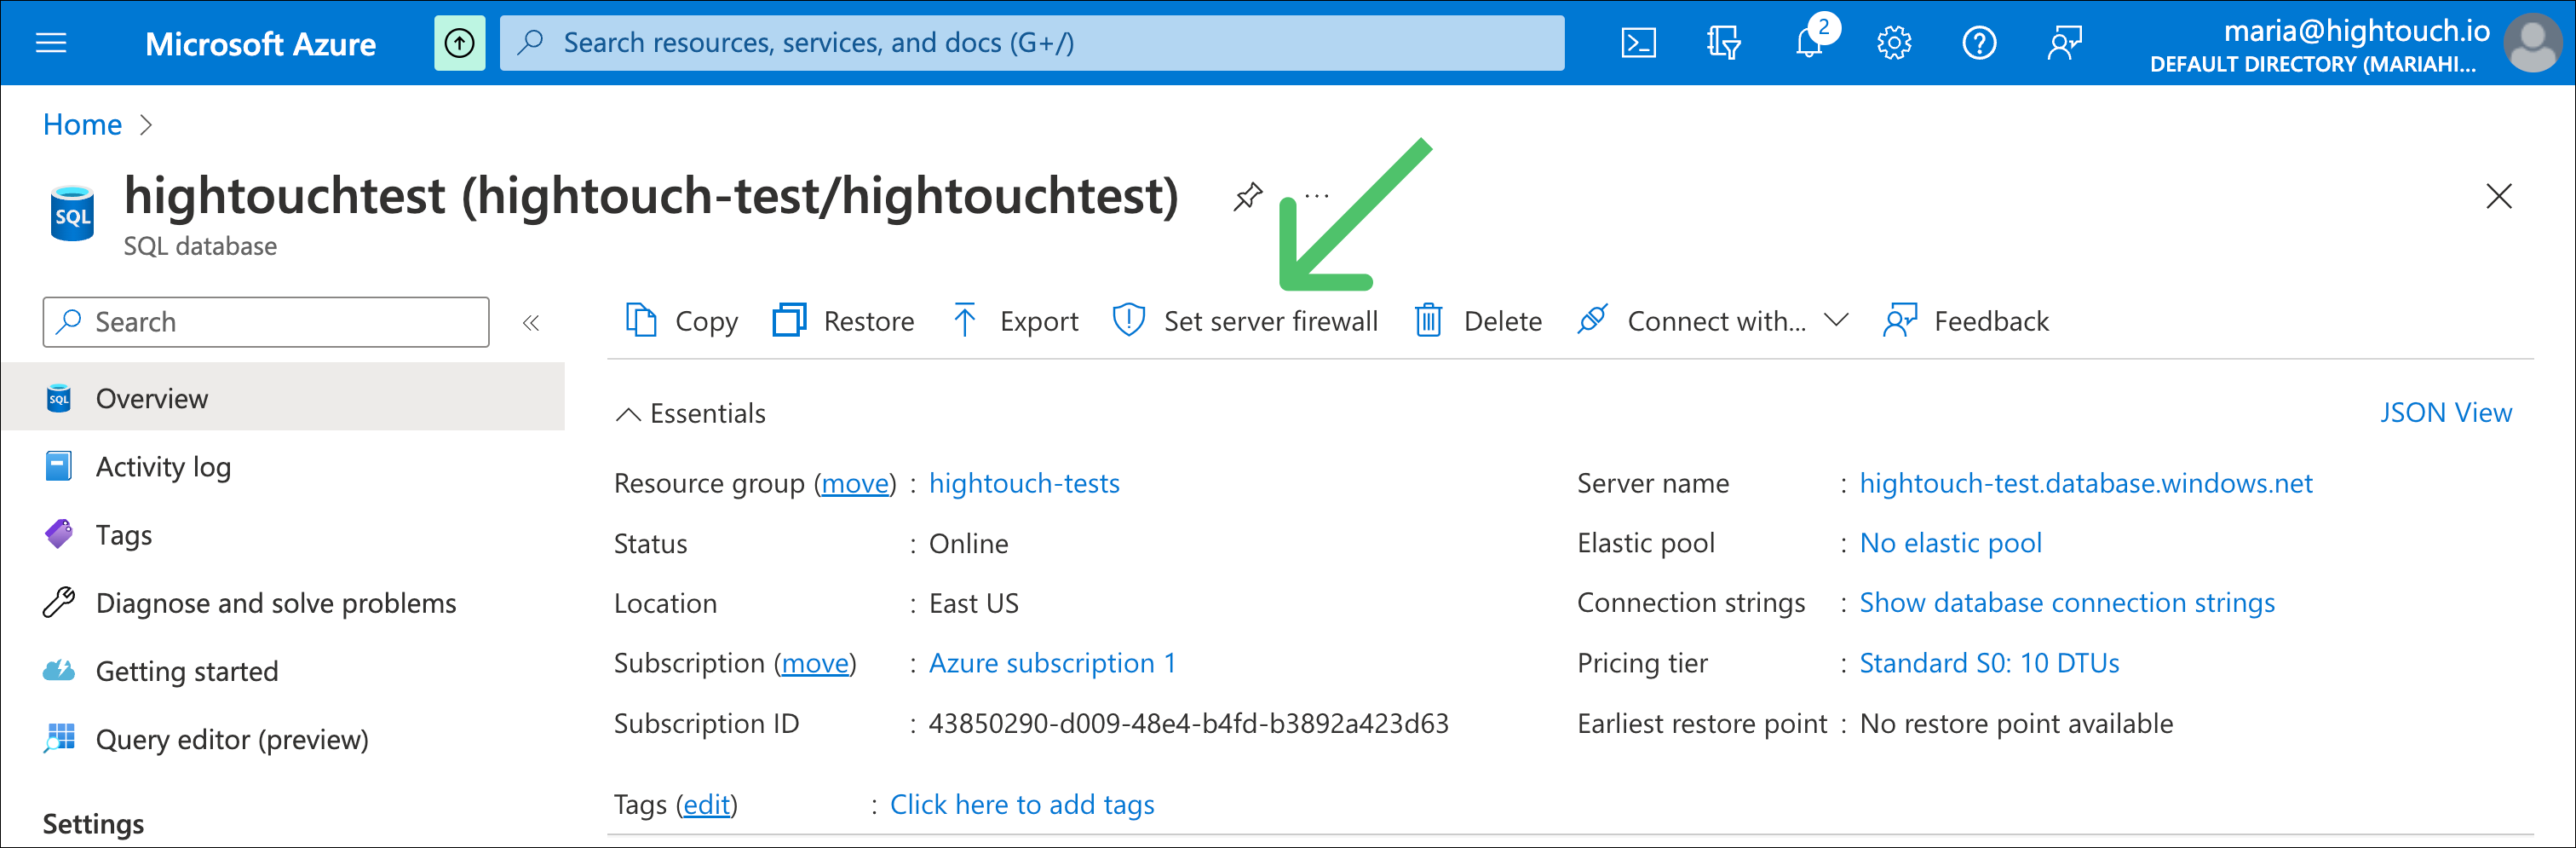 Azure Console Dashboard with settings